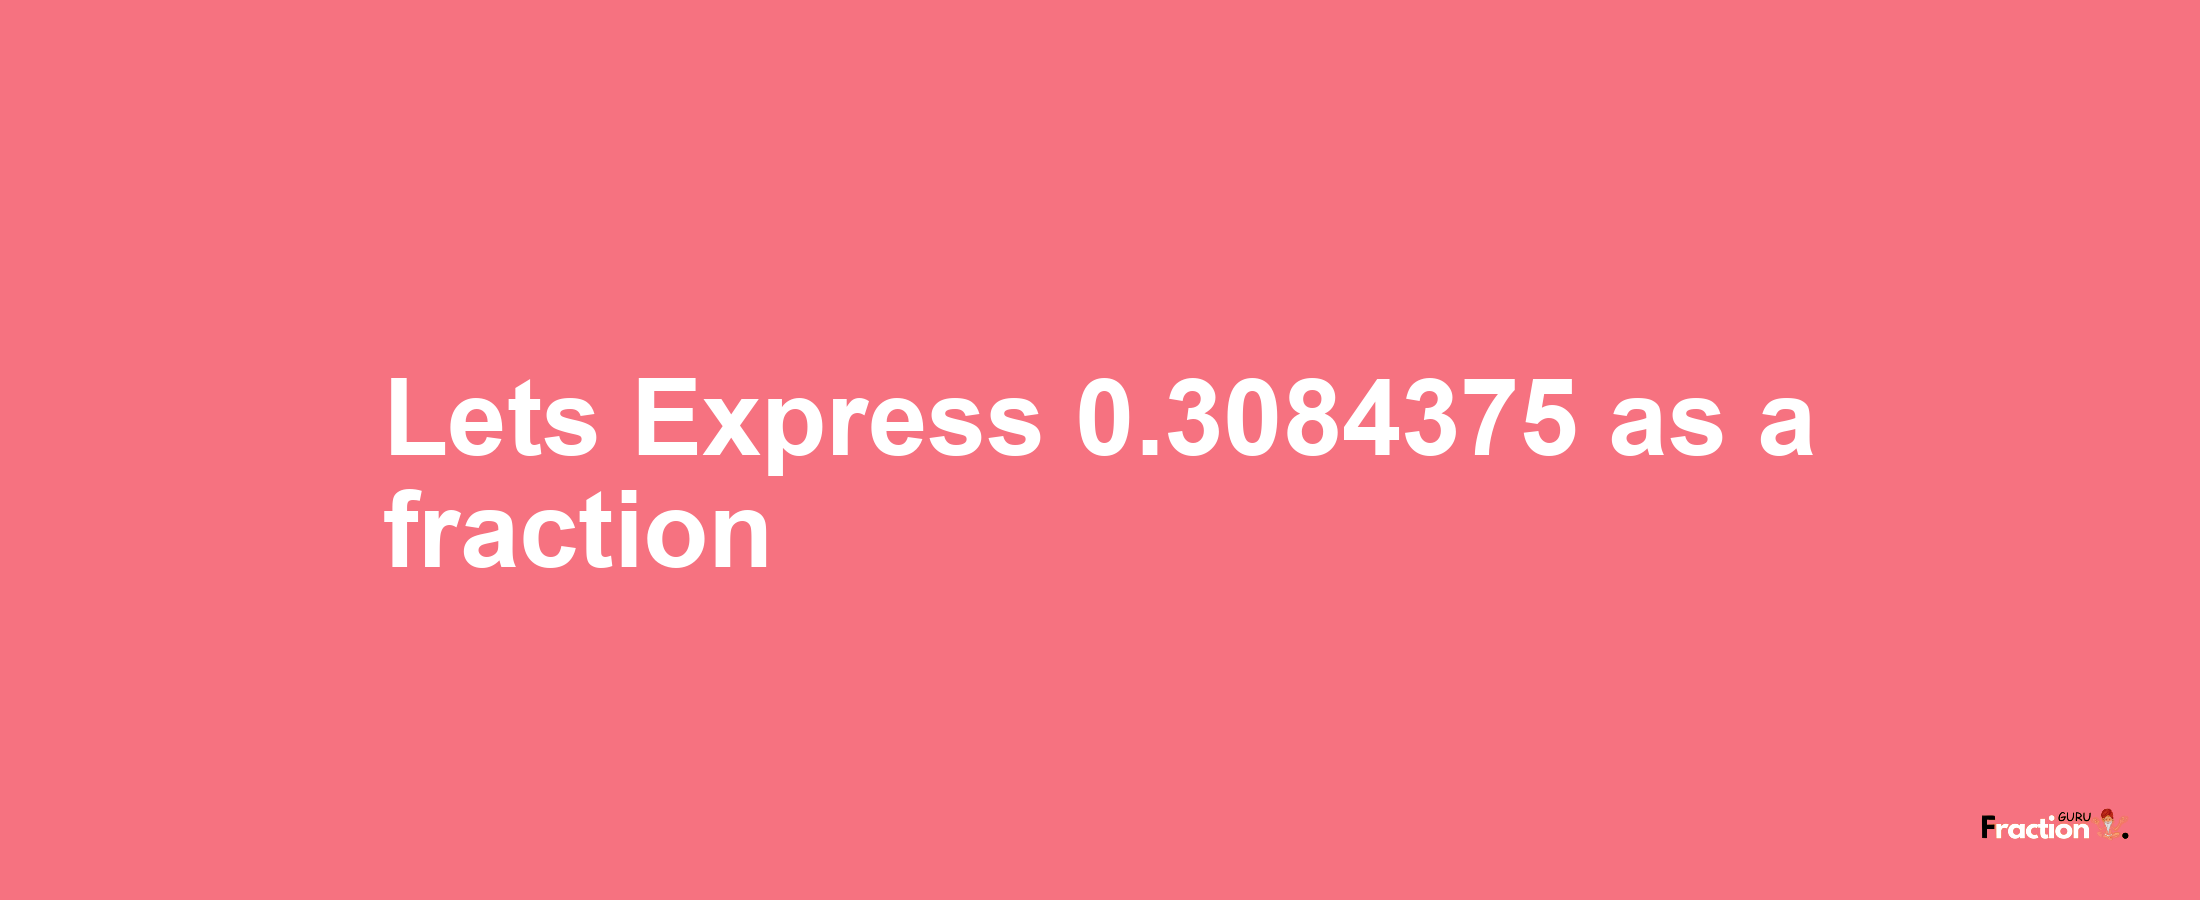 Lets Express 0.3084375 as afraction